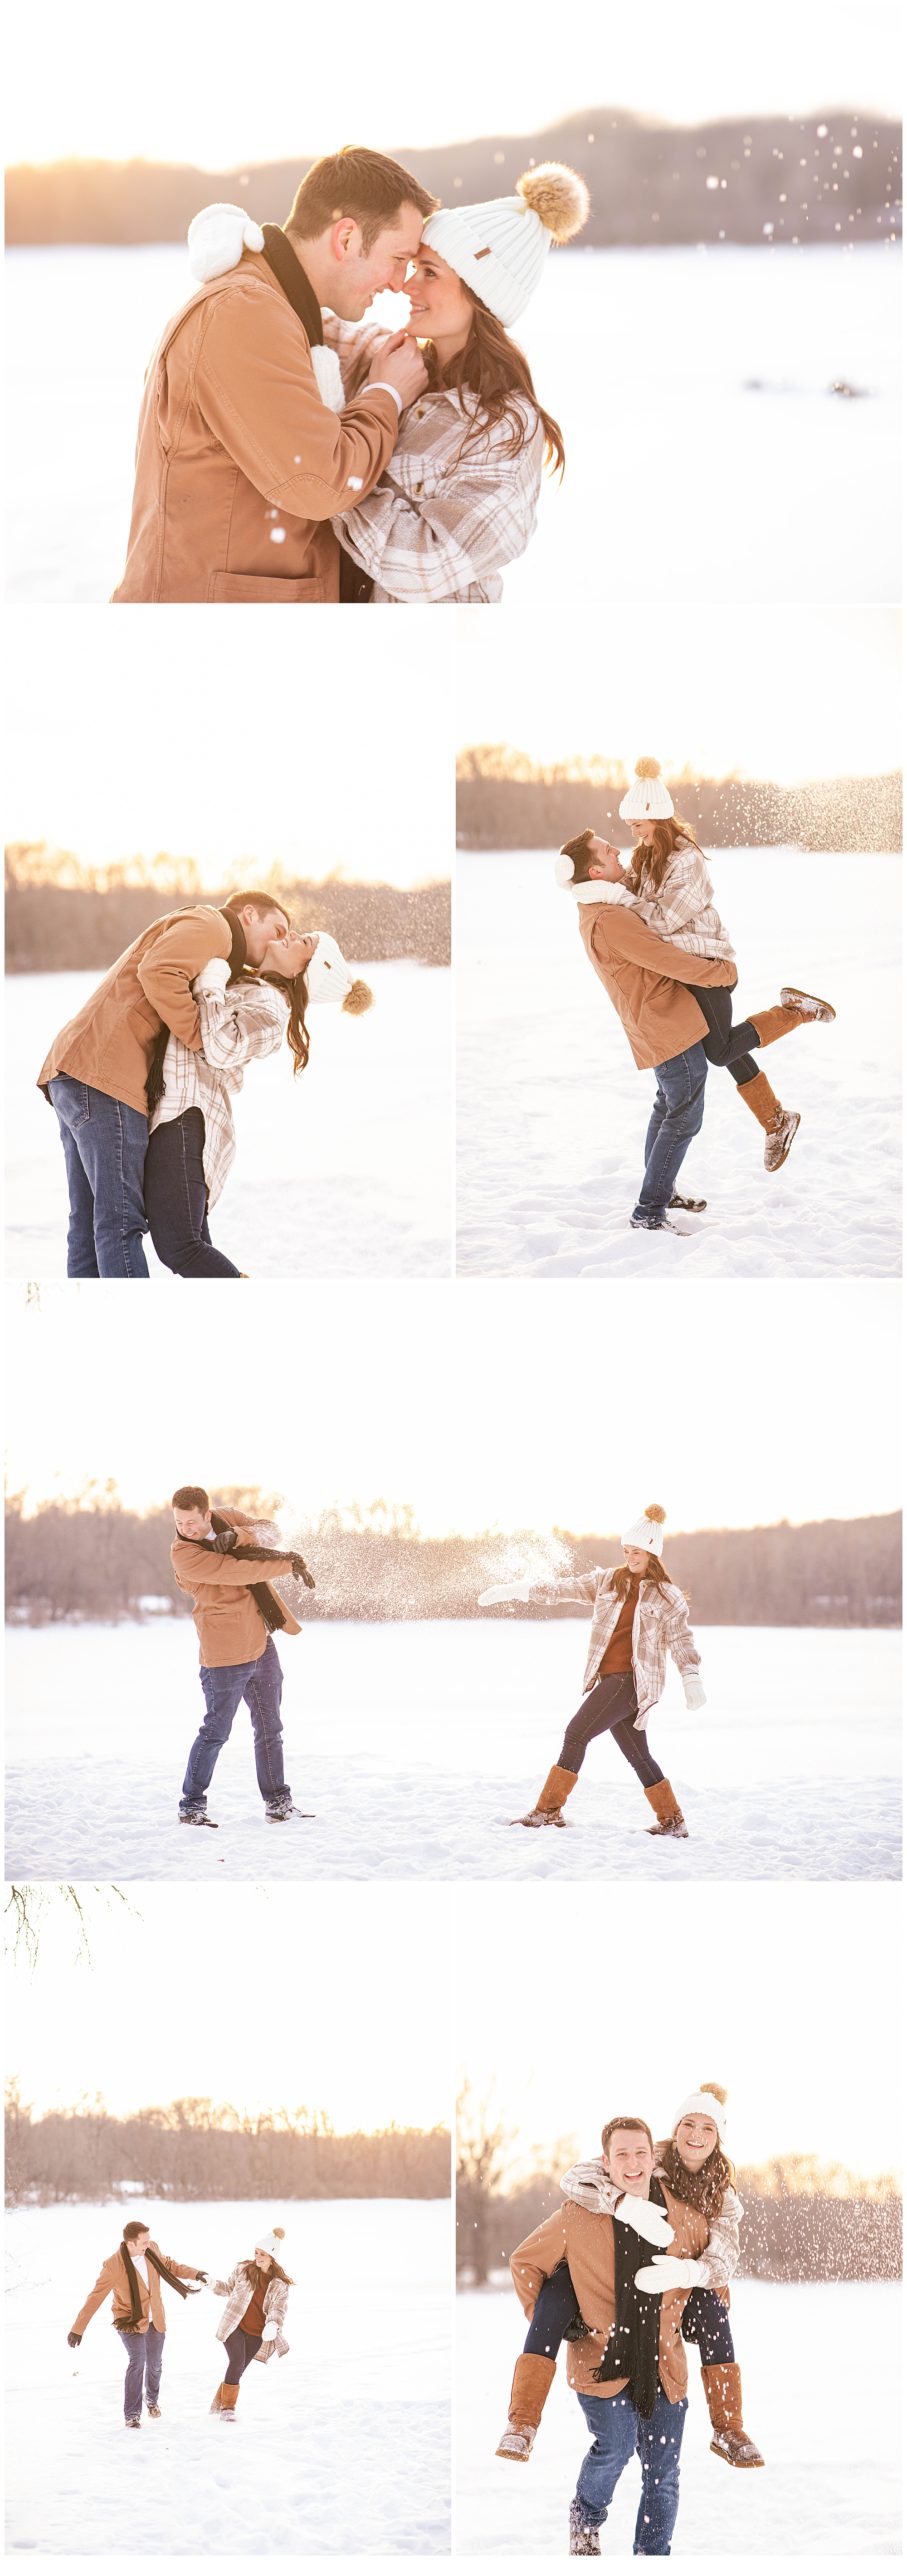 winter photo couples outfit inspiration